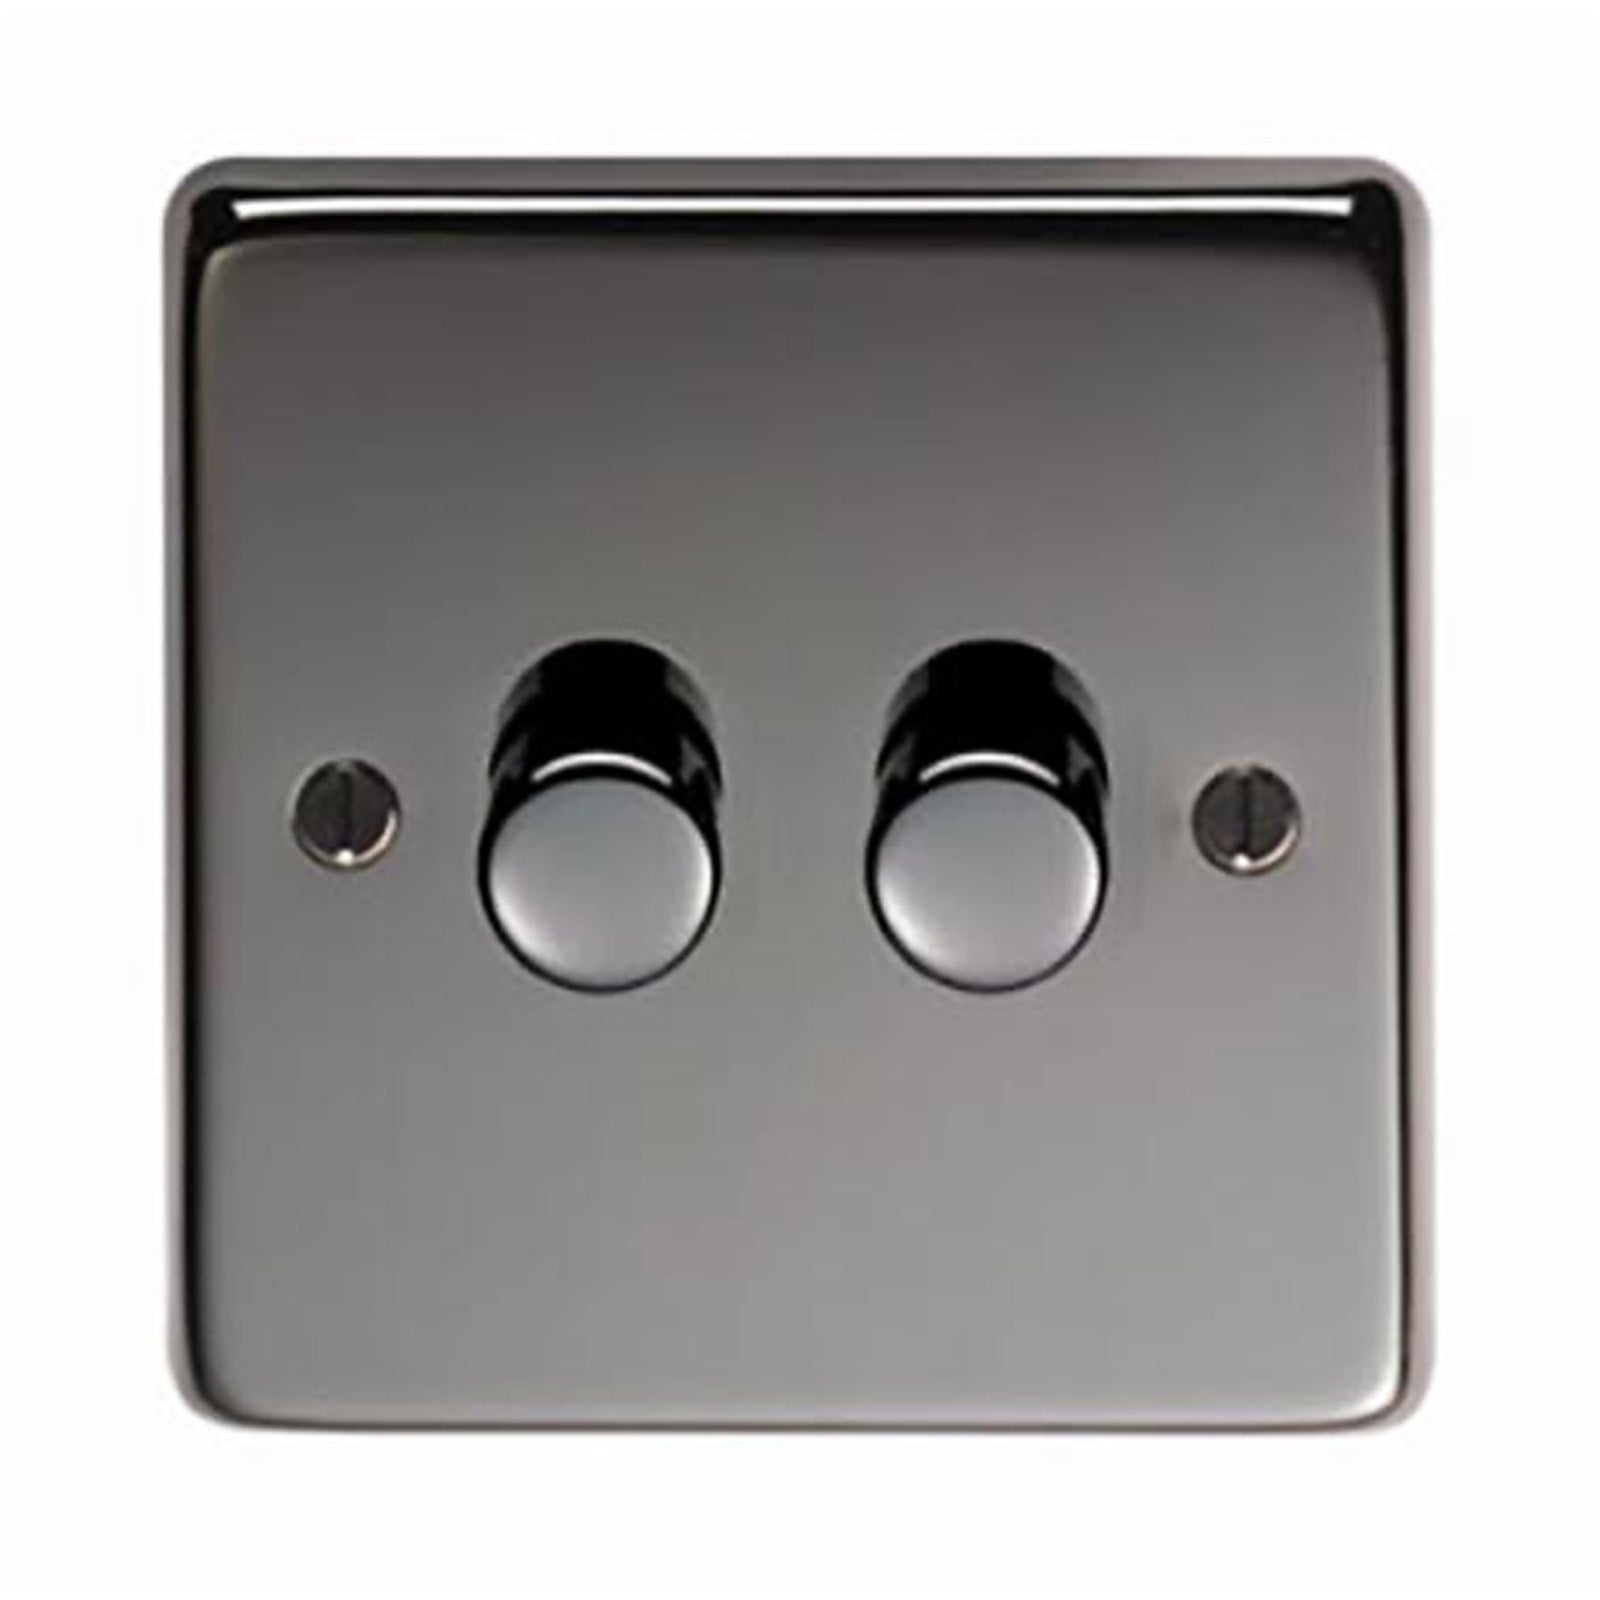 SHOW Image of Double LED Dimmer Switch with Black Nickel finish